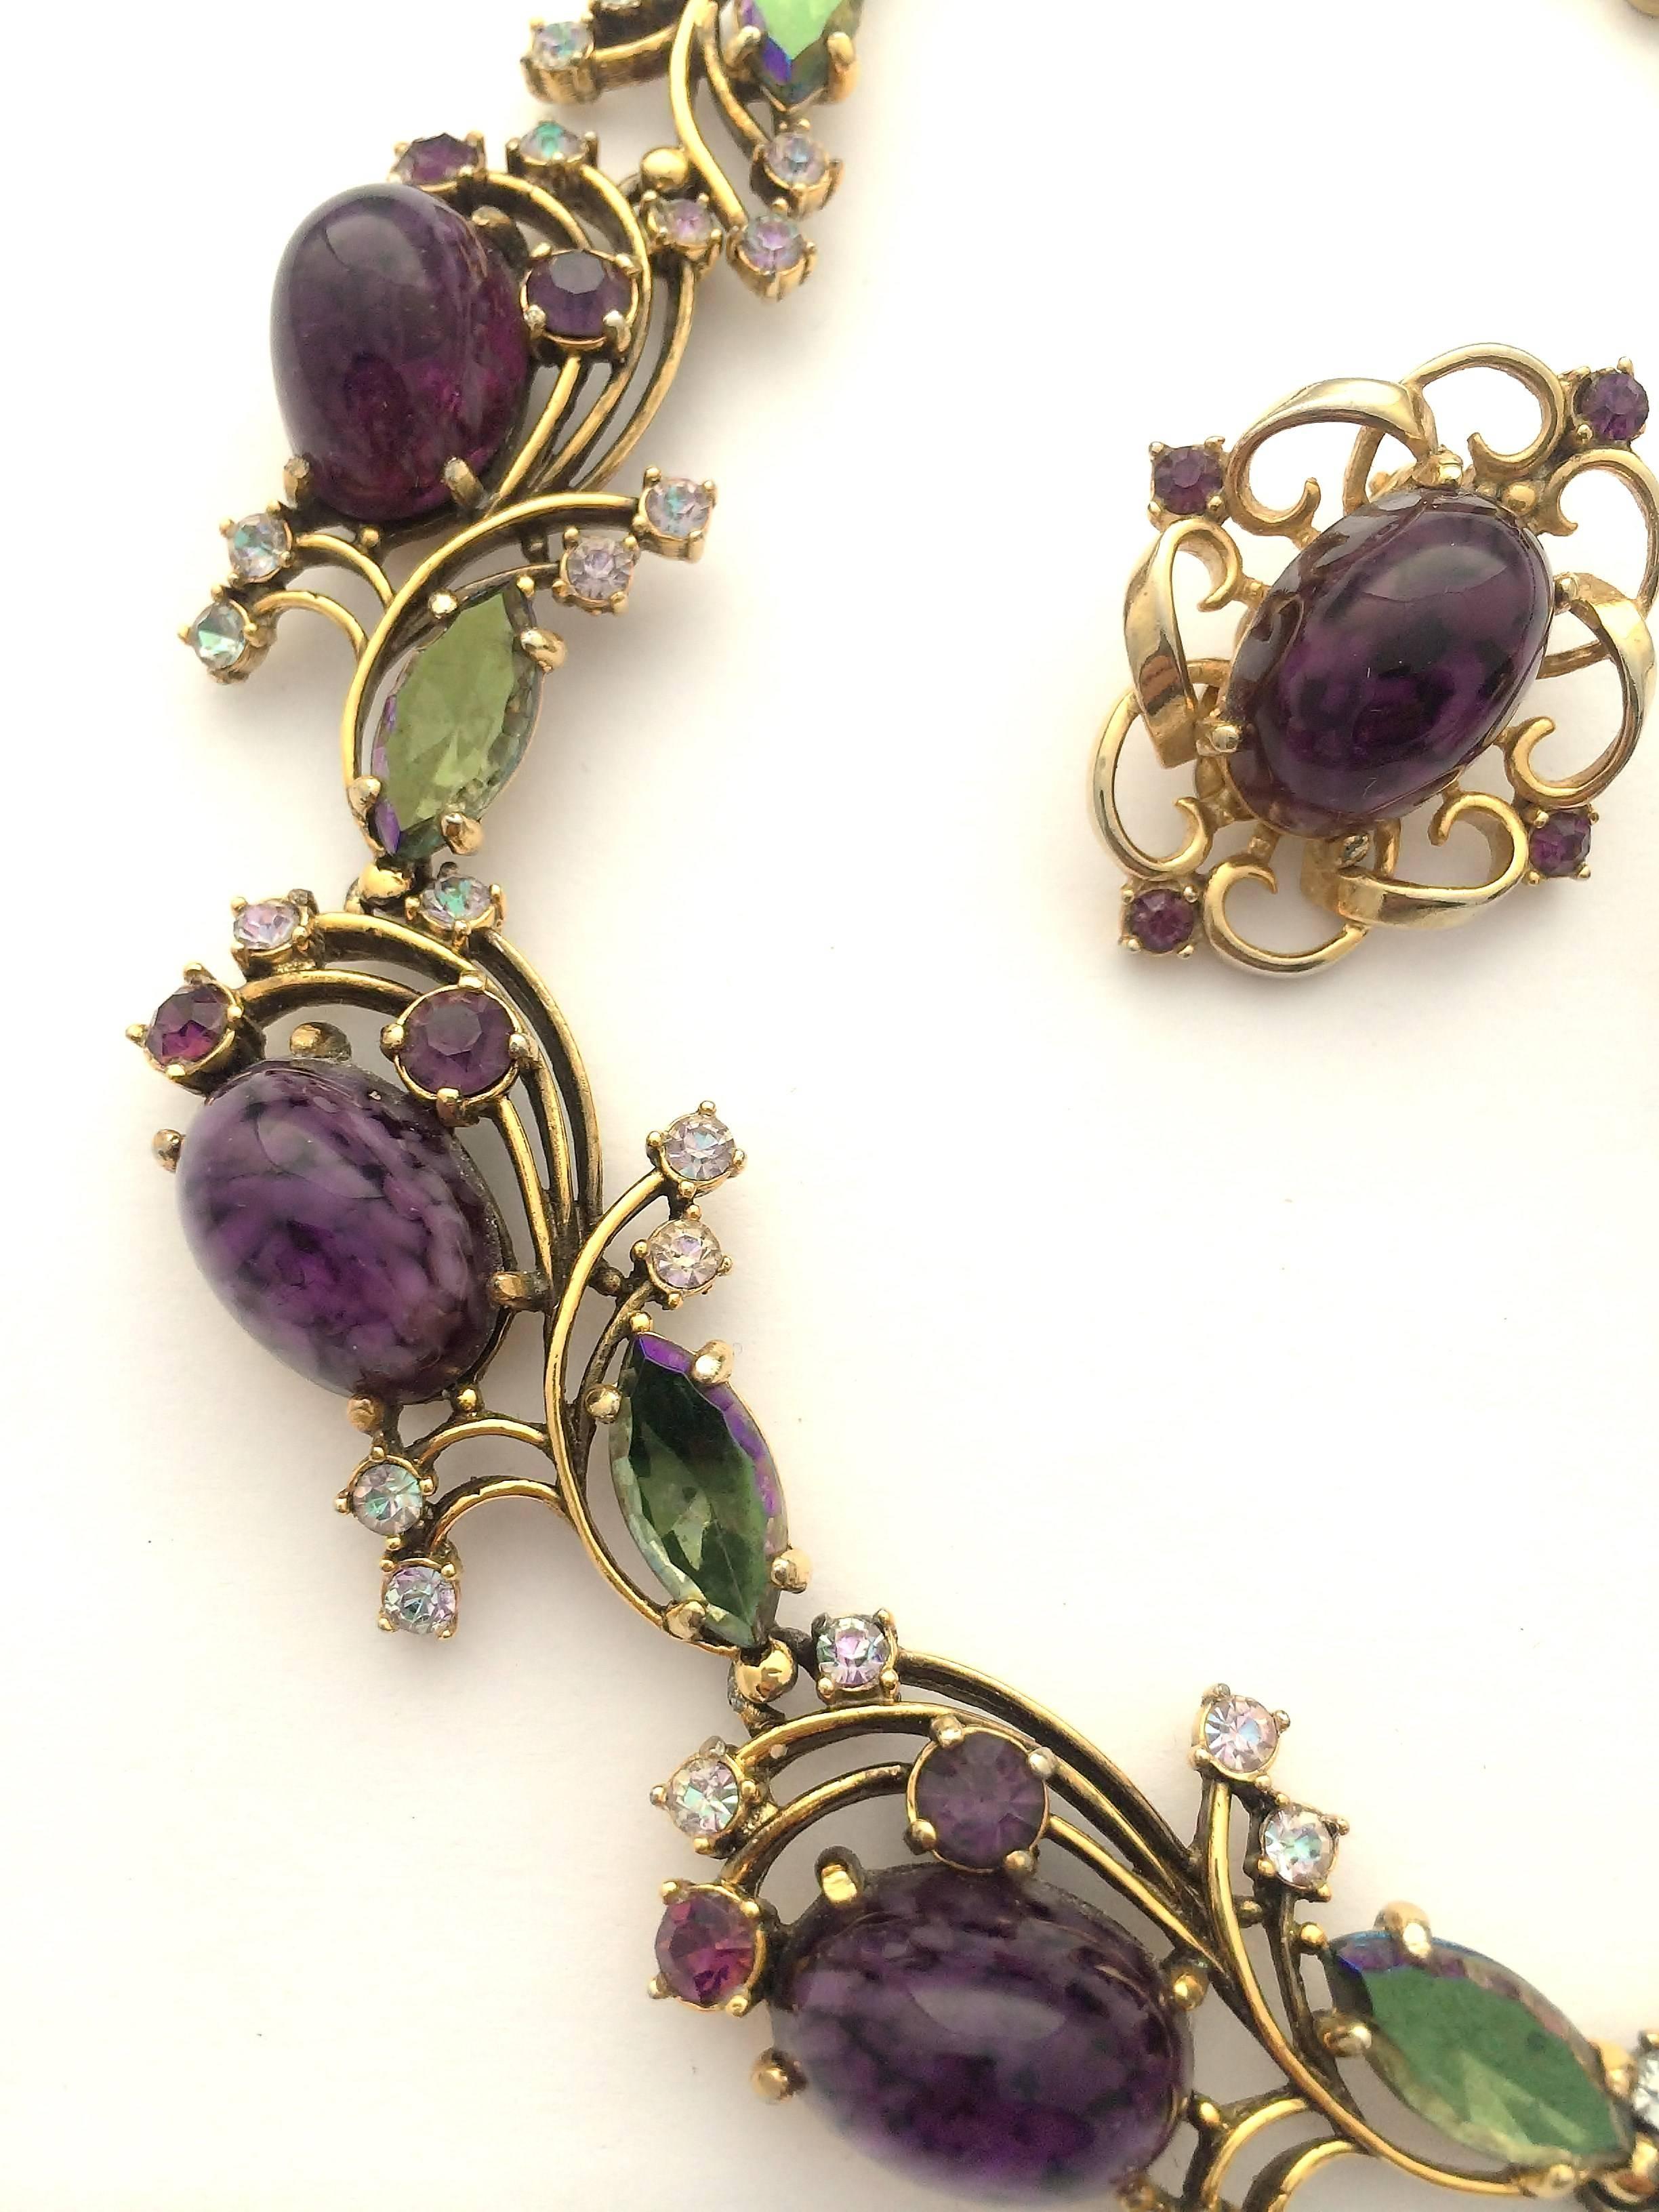 Elegant necklace, with matching earrings by Elsa Schiaparelli, 1950s 3